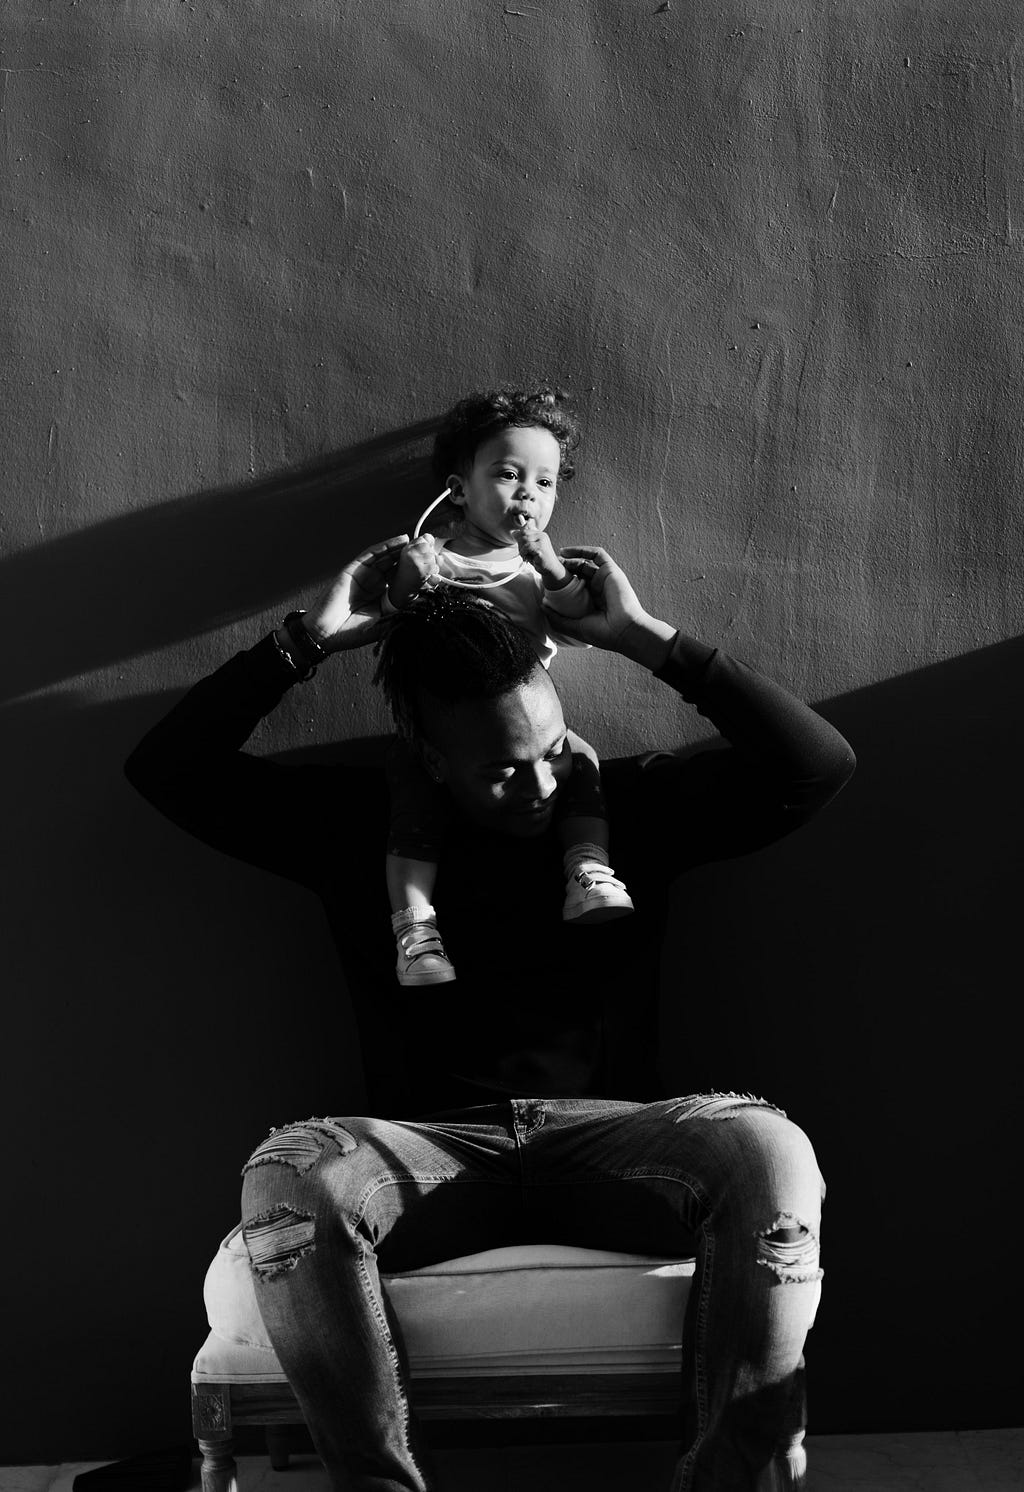 Black and white photo of a father holding young child.